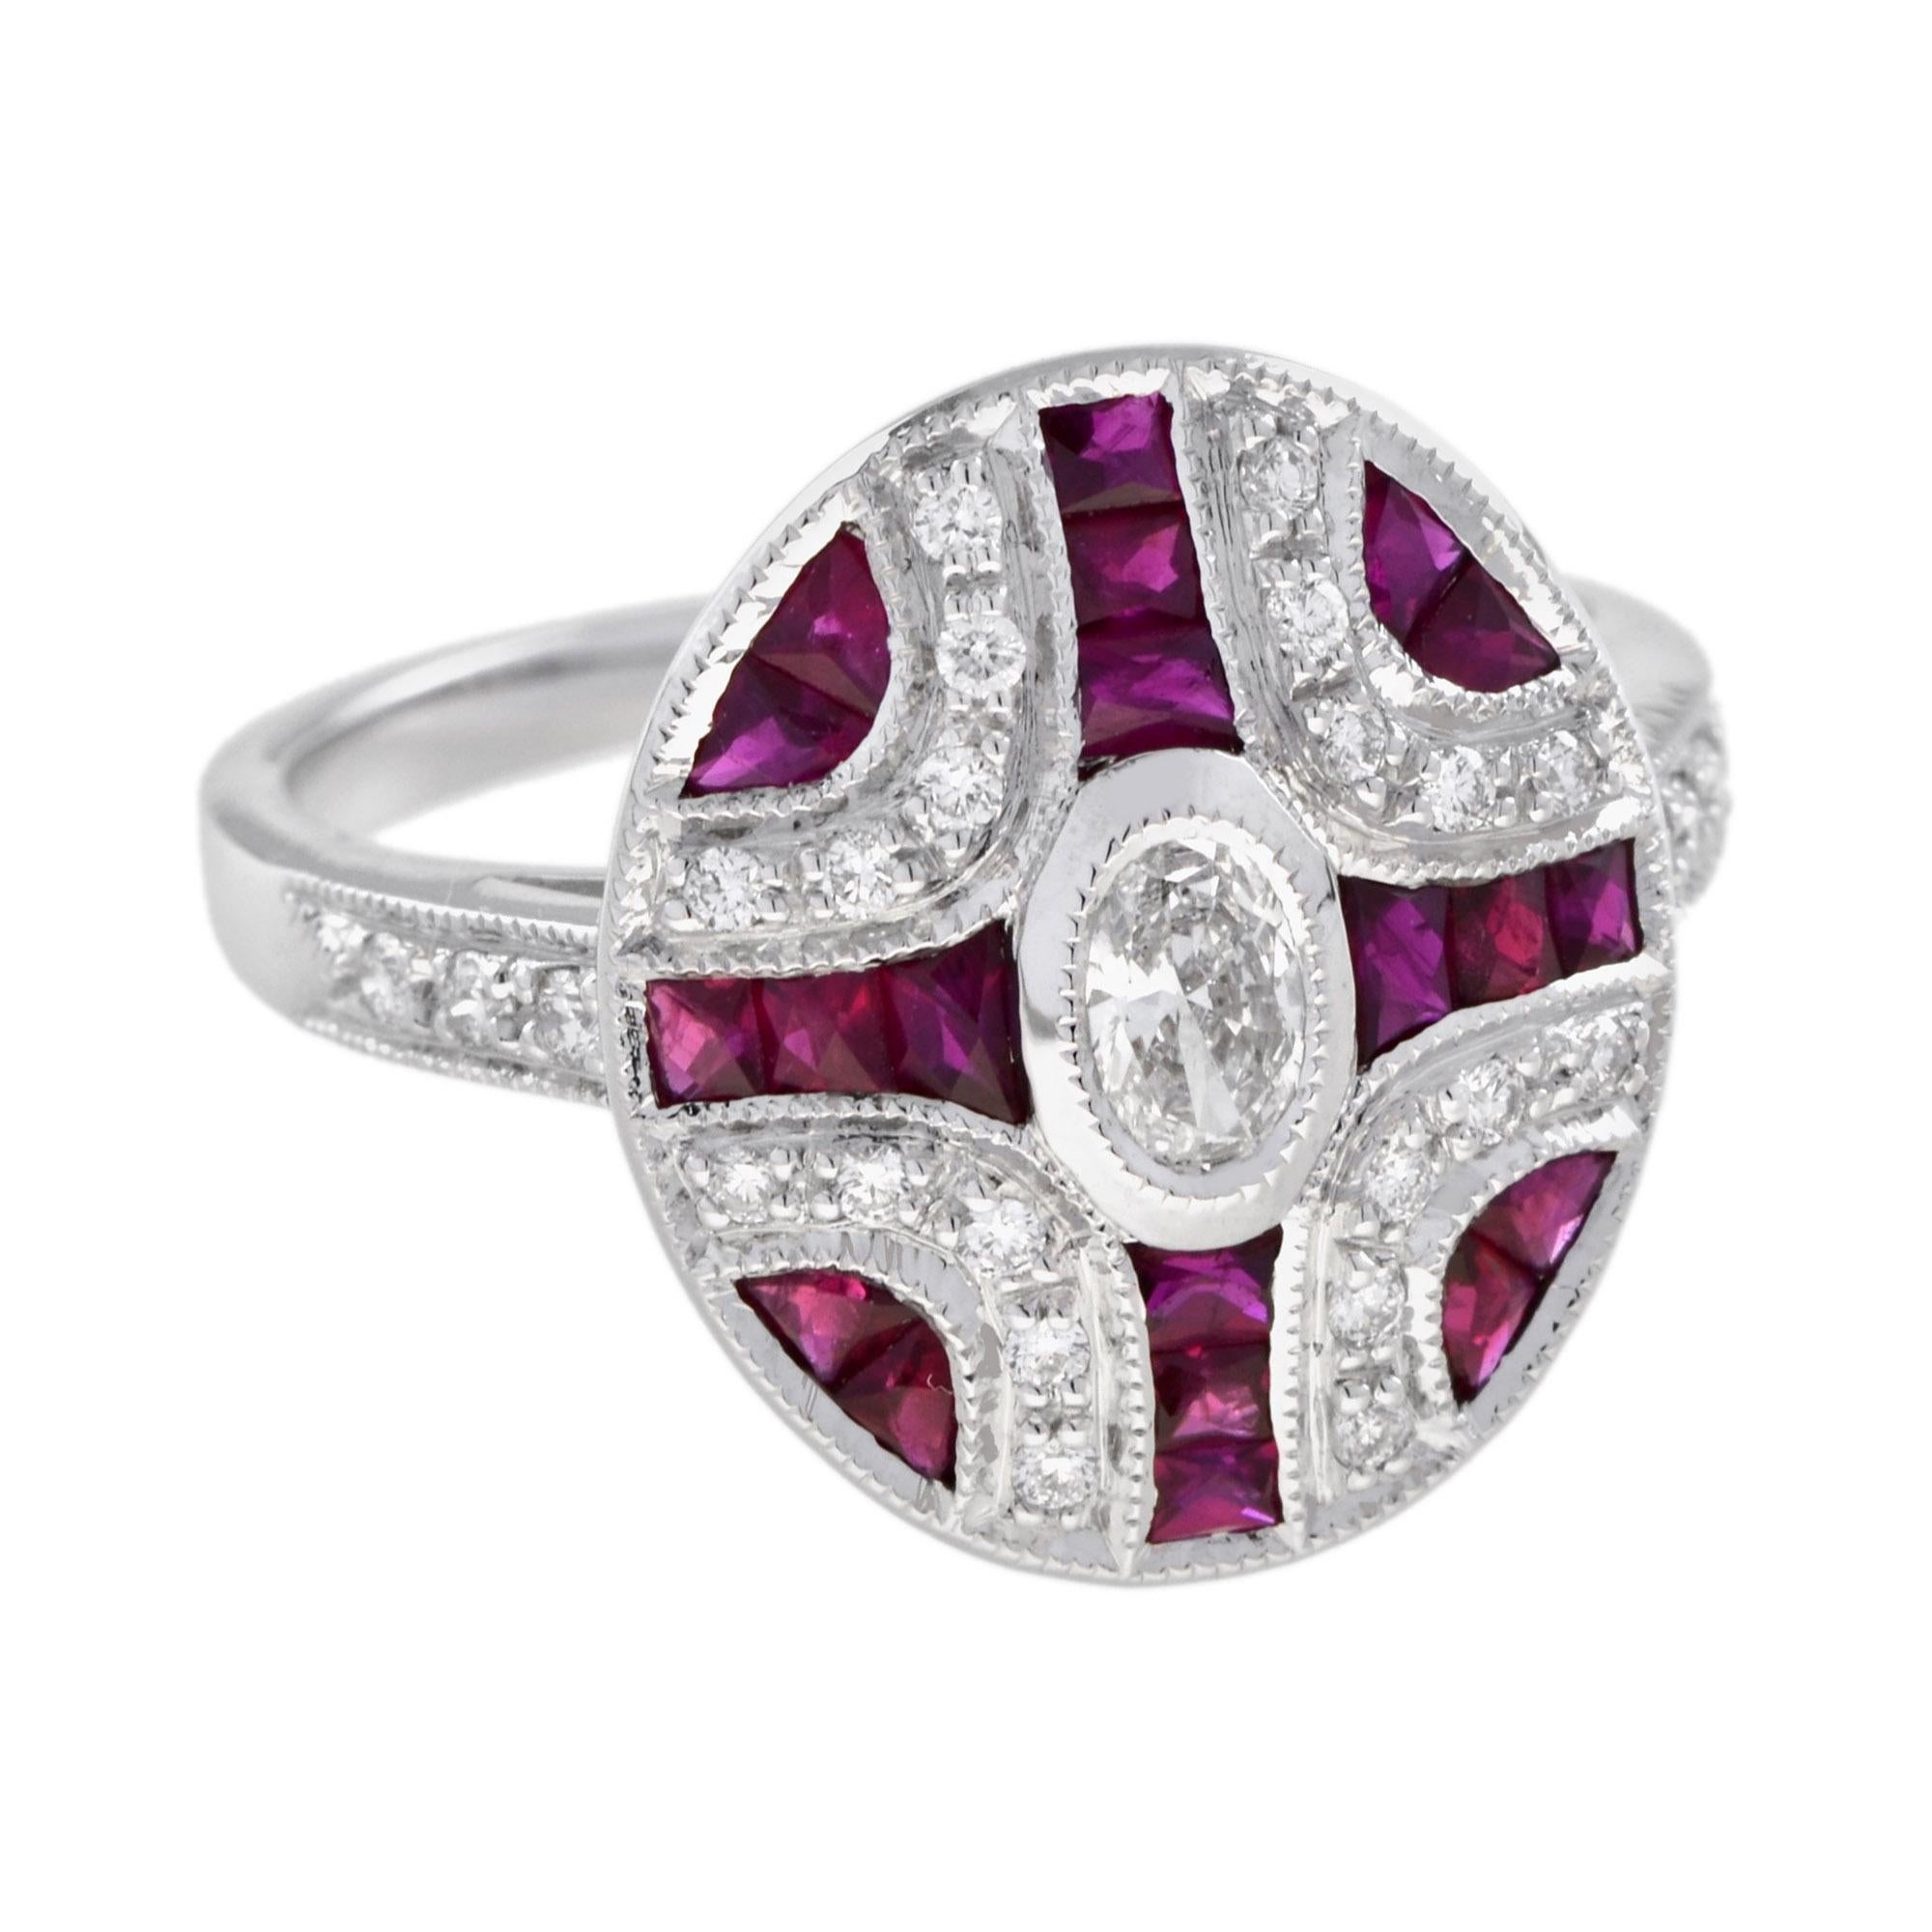 Oval Cut Diamond and Ruby Art Deco Style Engagement Ring in 14K White Gold For Sale